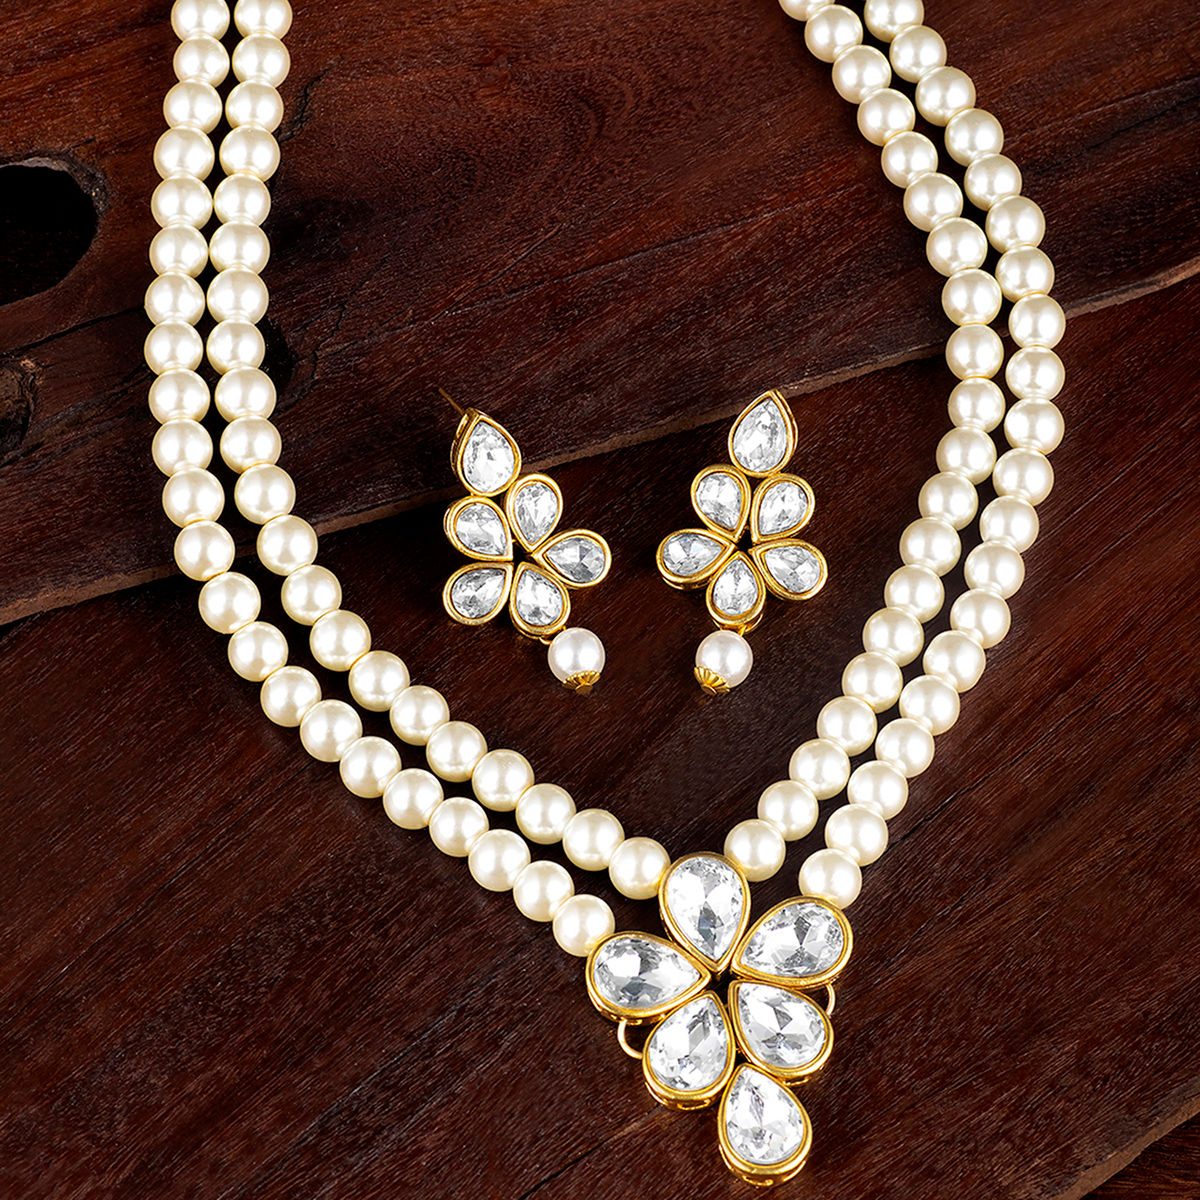 Victorian pendant pearls necklace | Indian jewelry – Haas Collections LLC